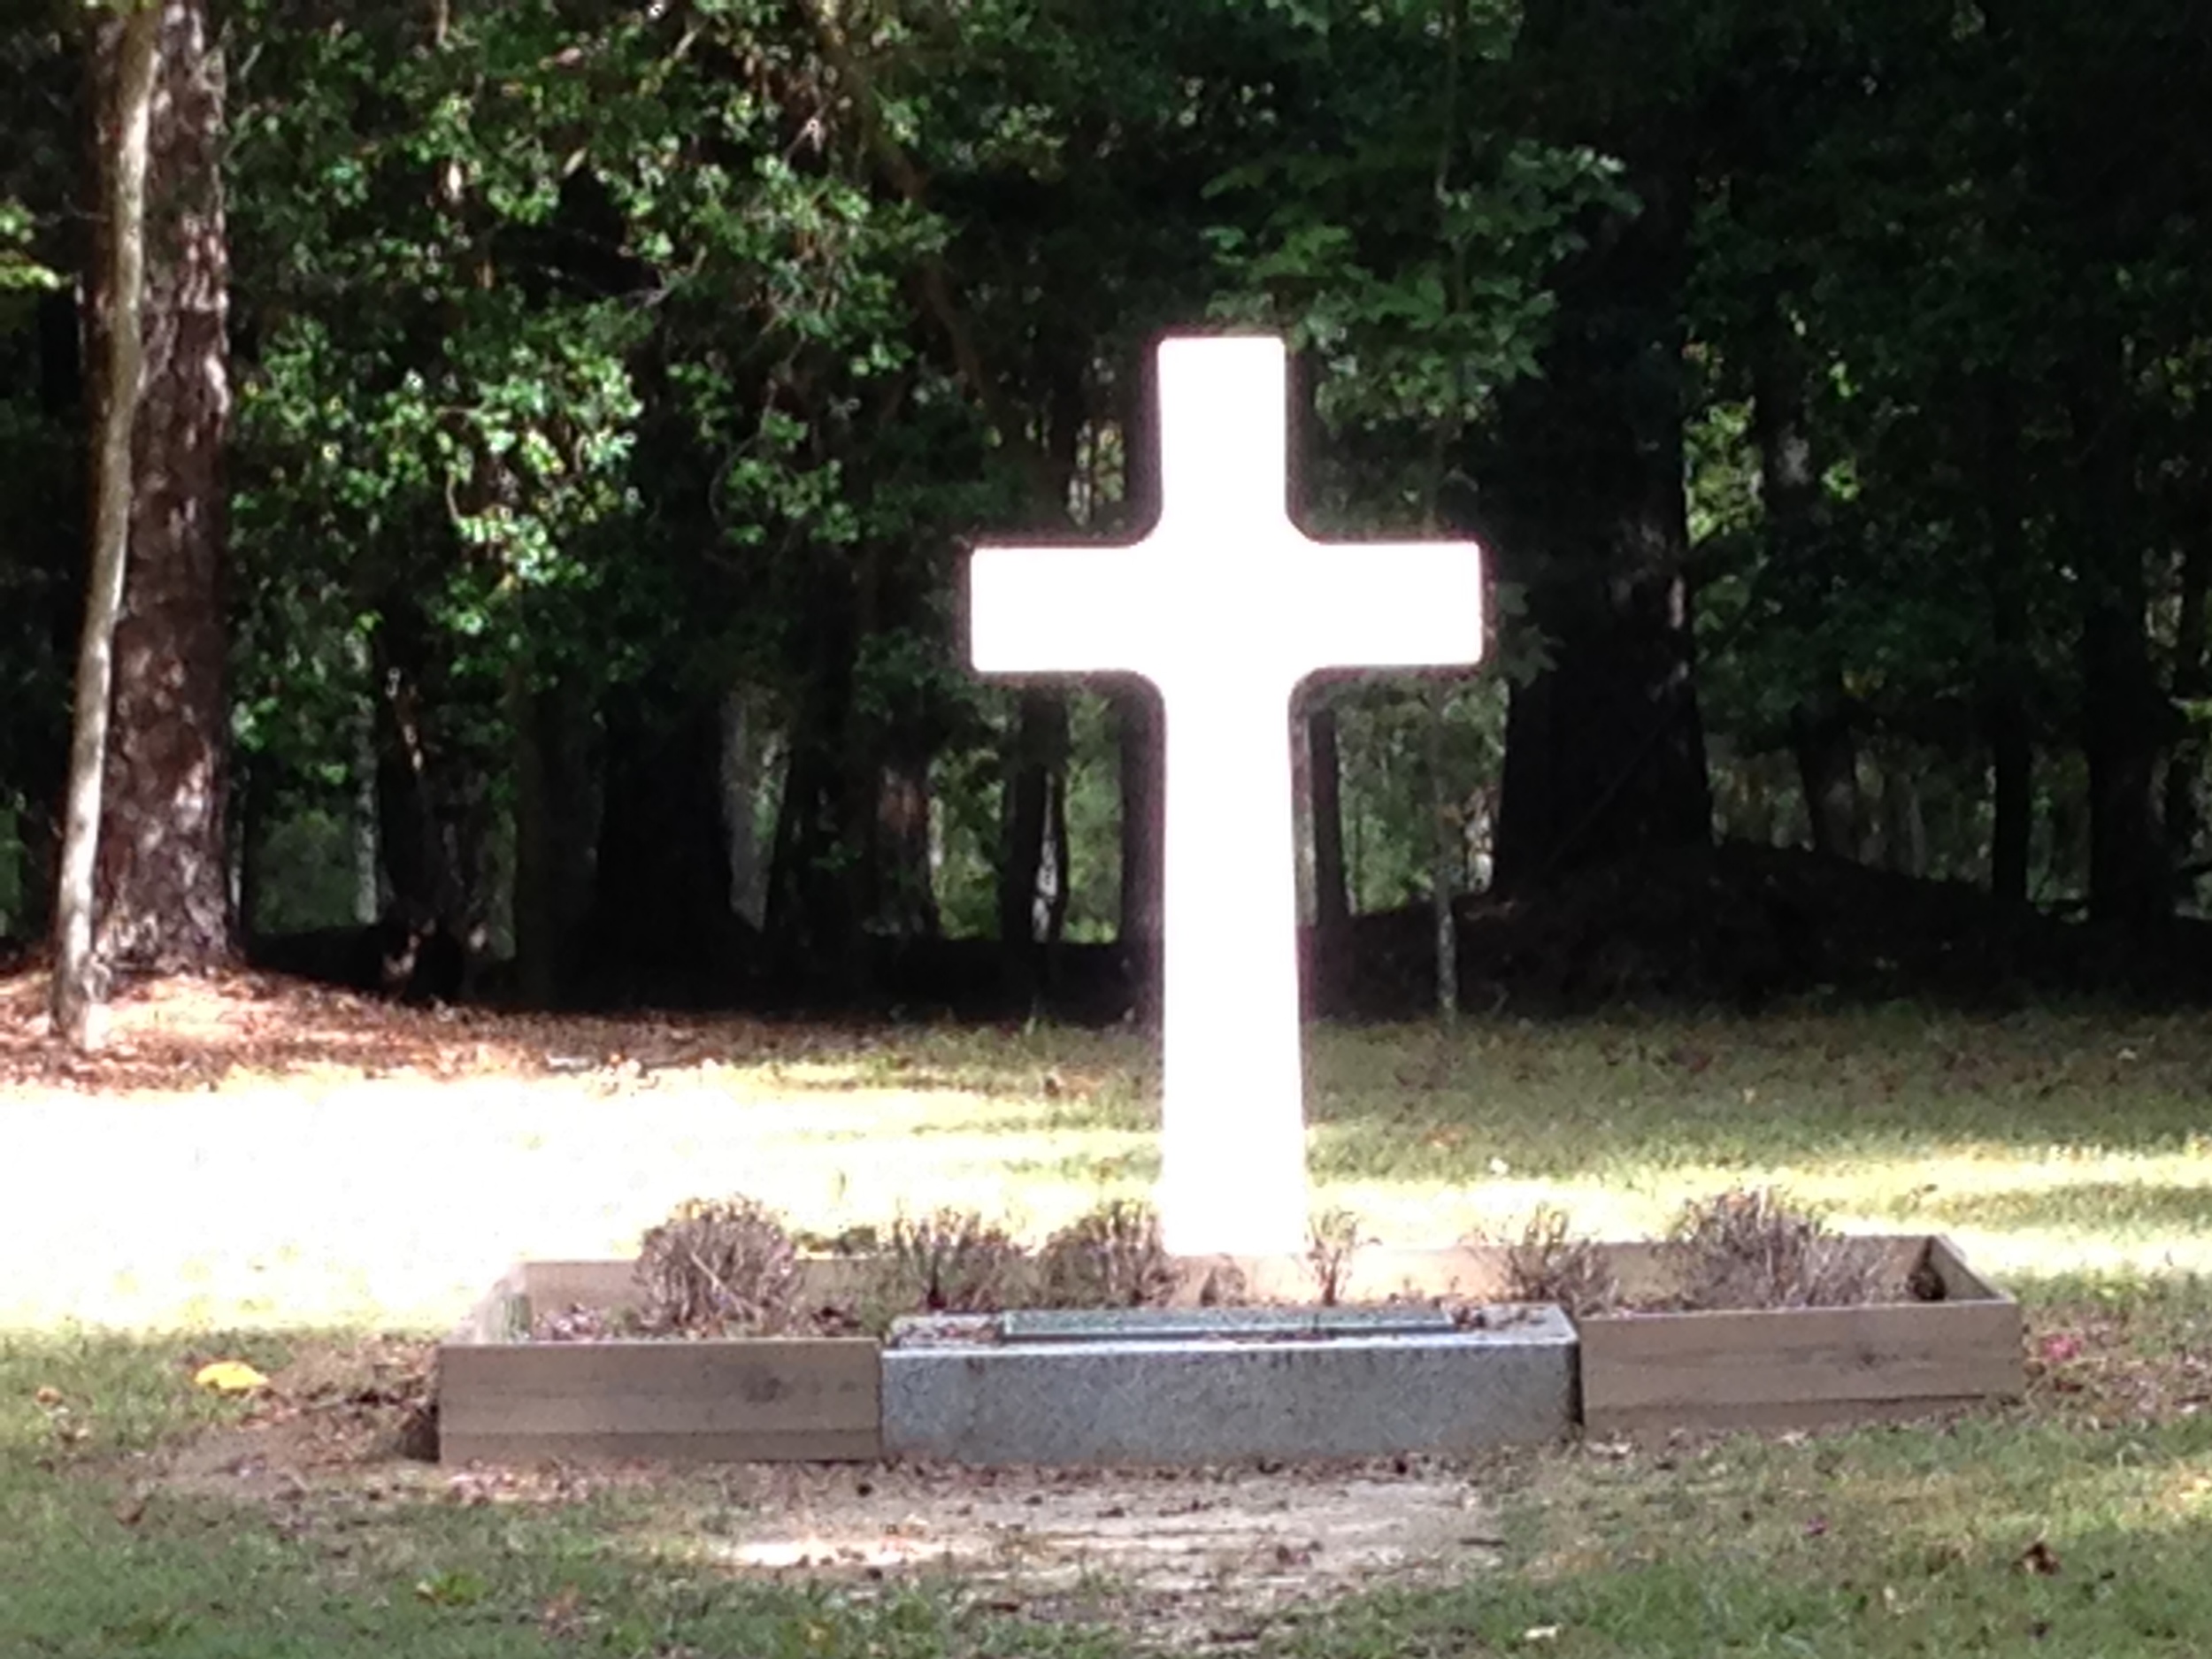  Gravesite of approximately 50 unknown French soldiers. &nbsp;Their sacrifice helped achieve American independence. 